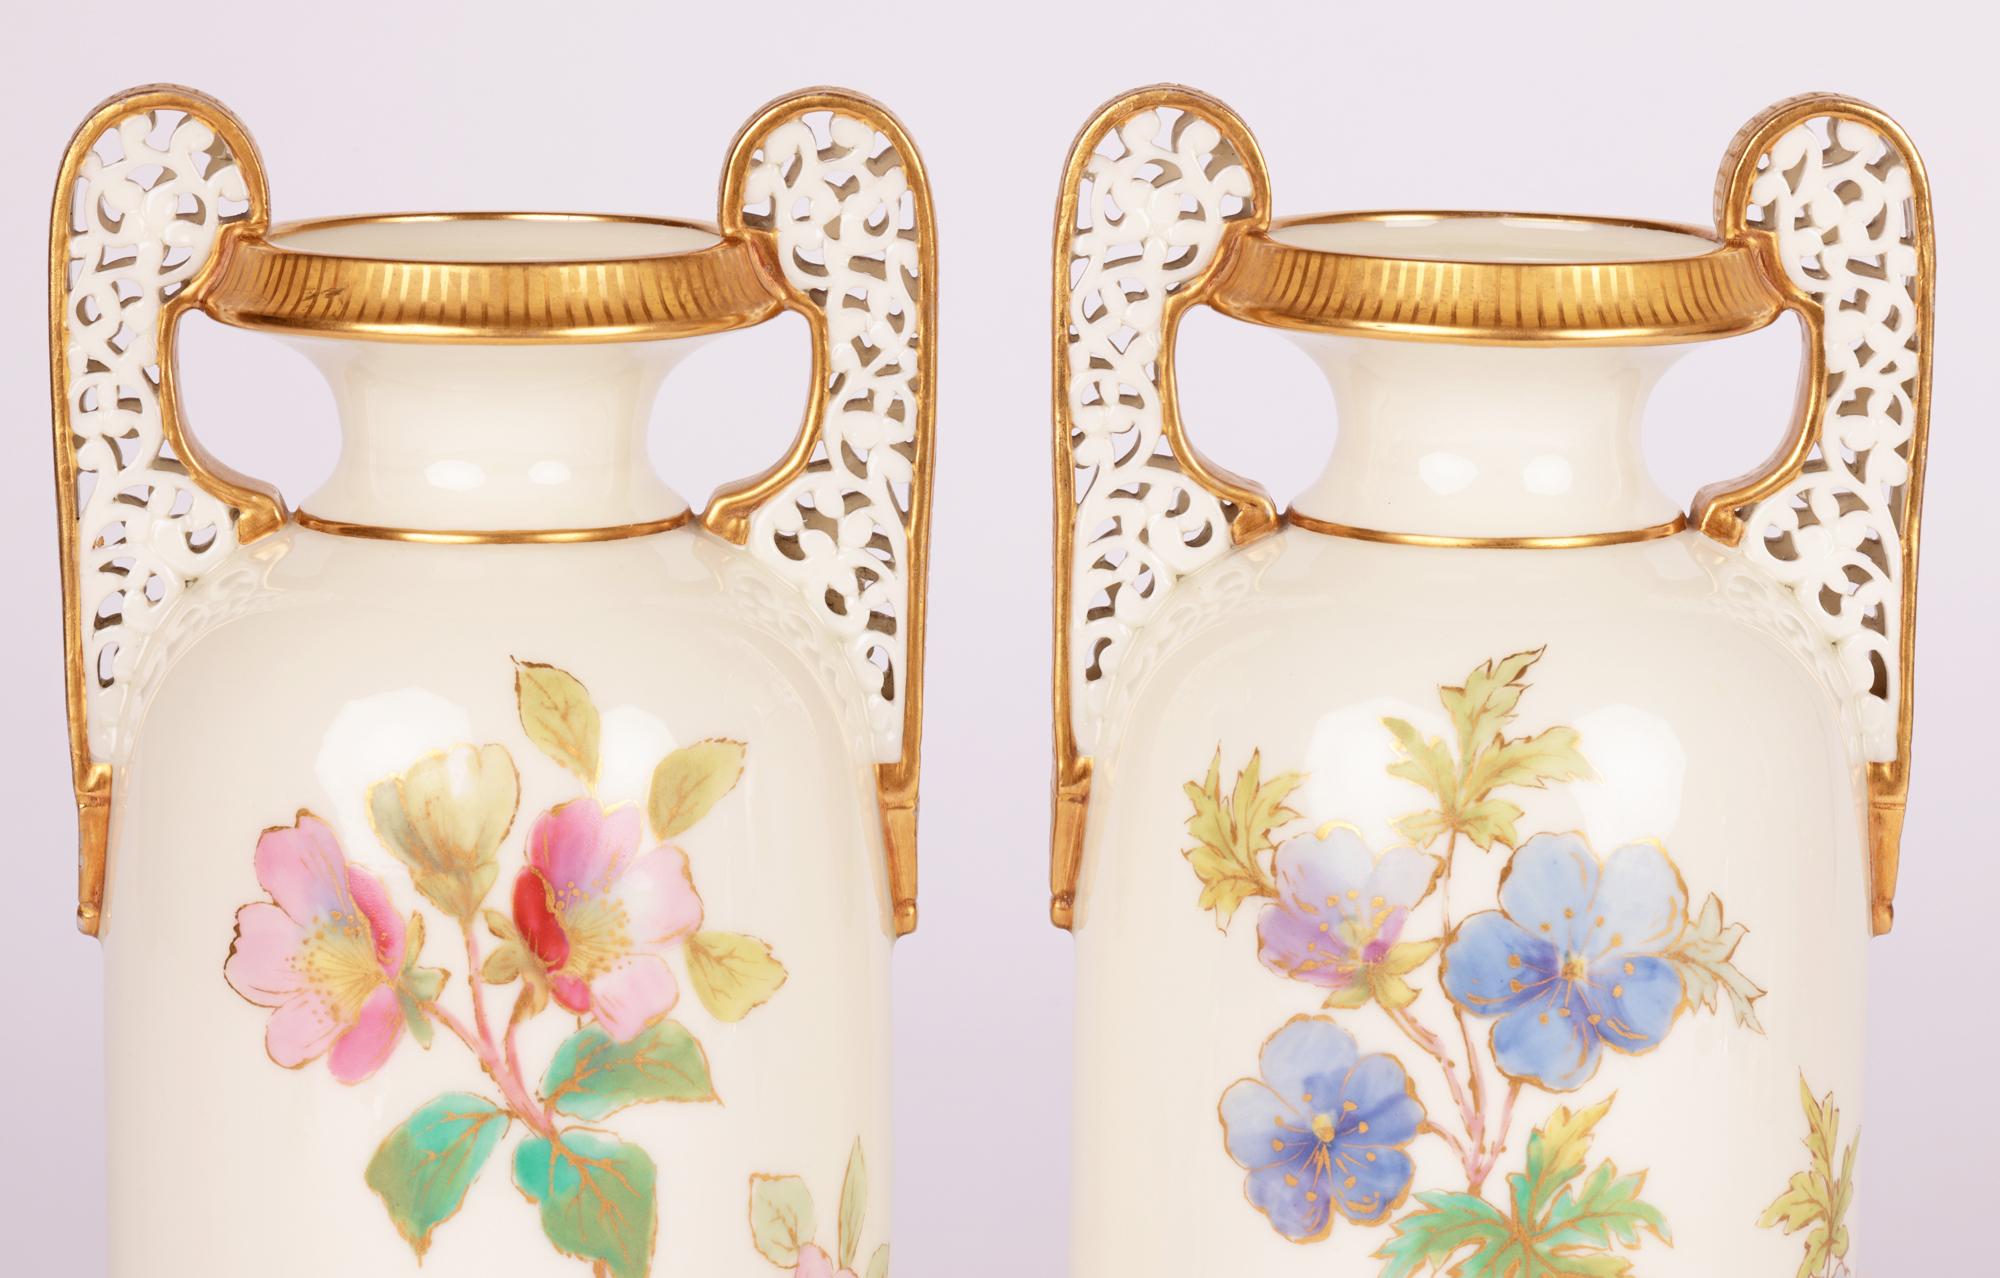 A very fine pair English twin handled porcelain vases painted with flowers by renowned makers Grainger Worcester and dating from the 19th century. The vases of tall cylindrical shape stand on a narrow round unglazed foot with slightly recessed base